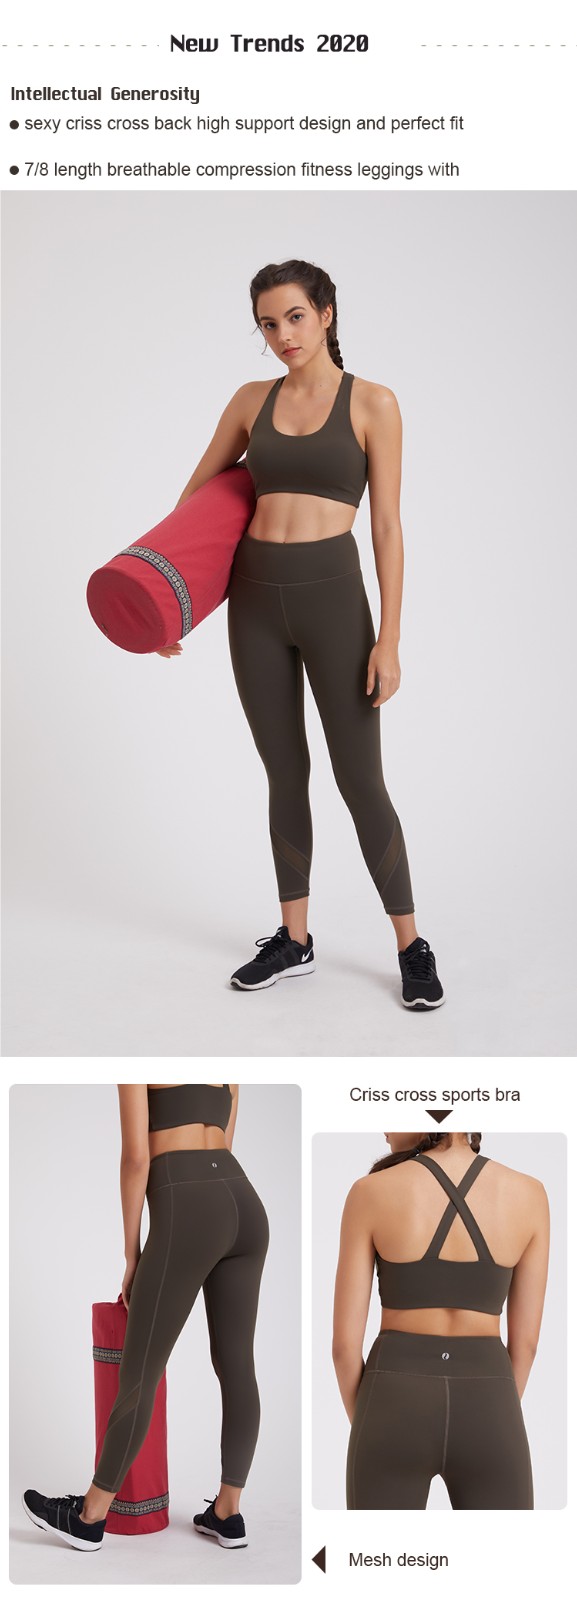 INGOR cute yoga outfits owner for sport-3